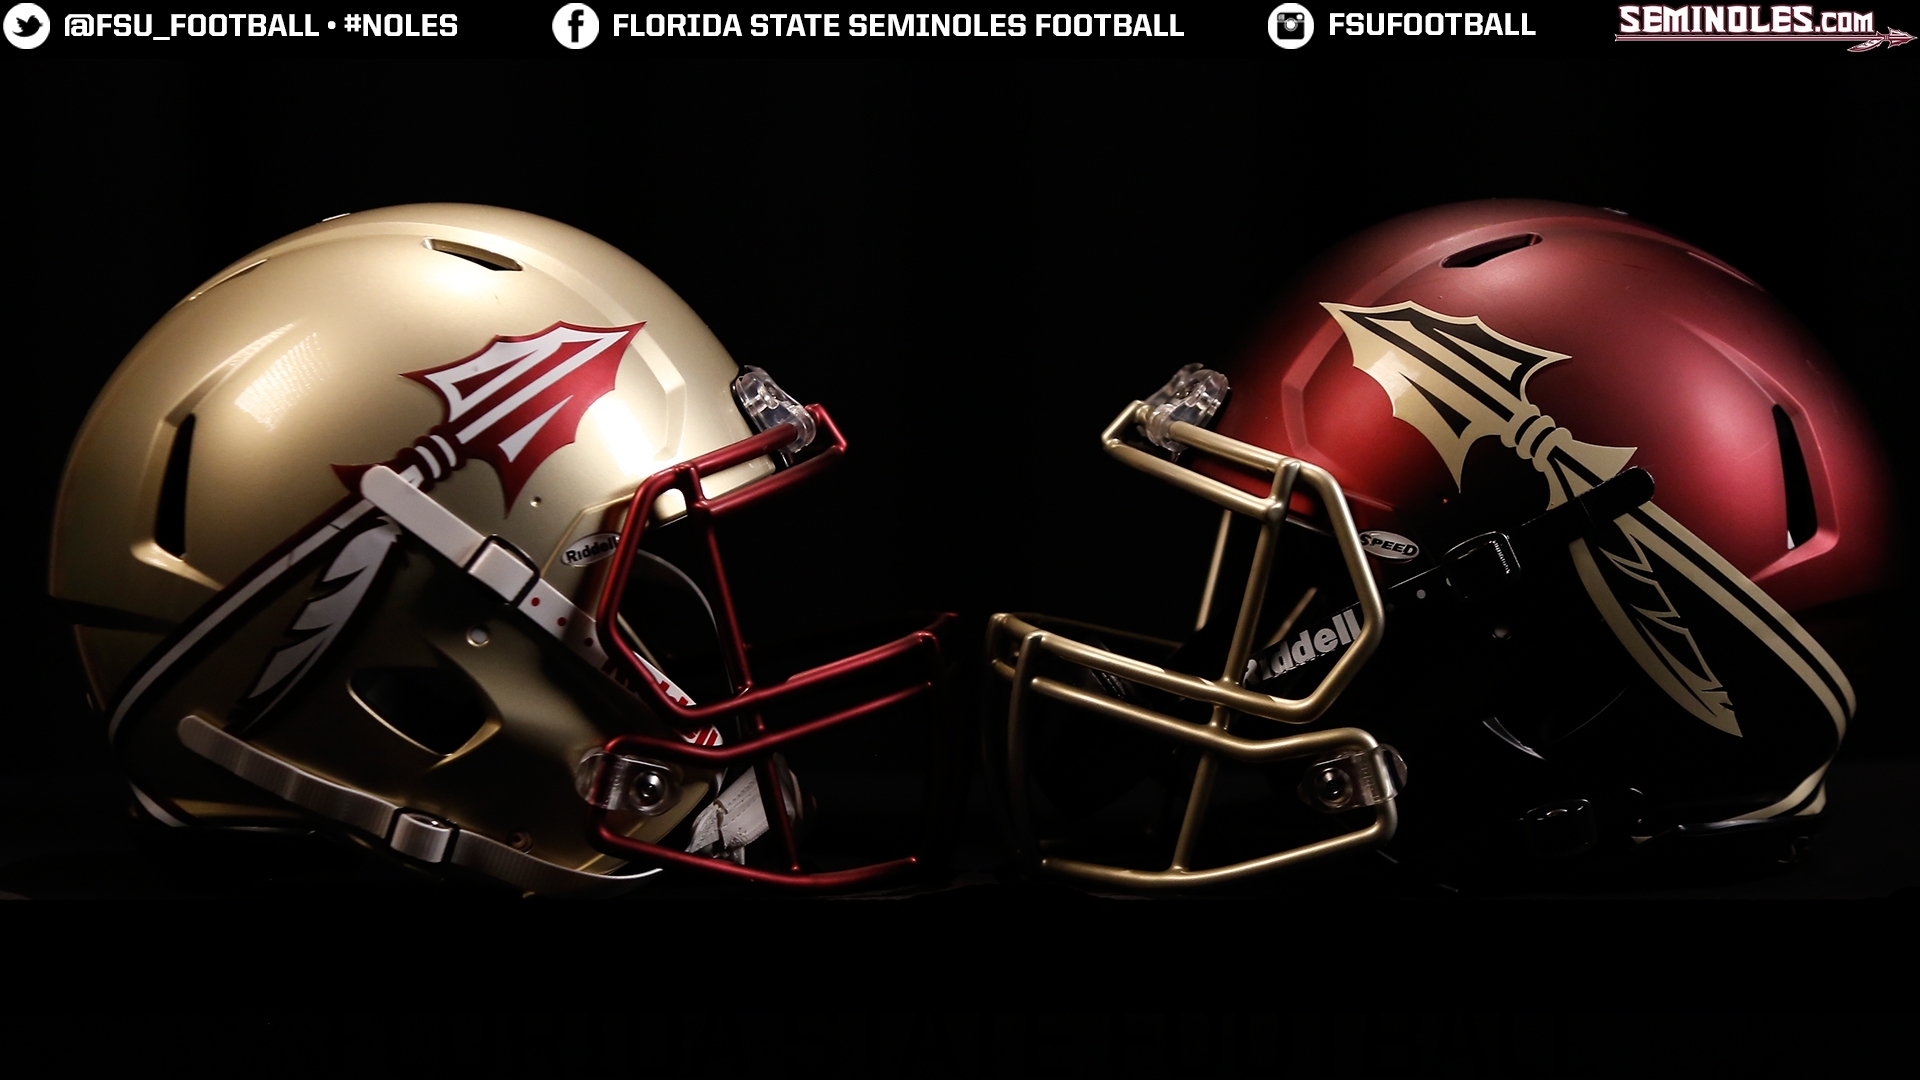 10 Top Florida State Football Wallpaper FULL HD 1920×1080 For PC Background